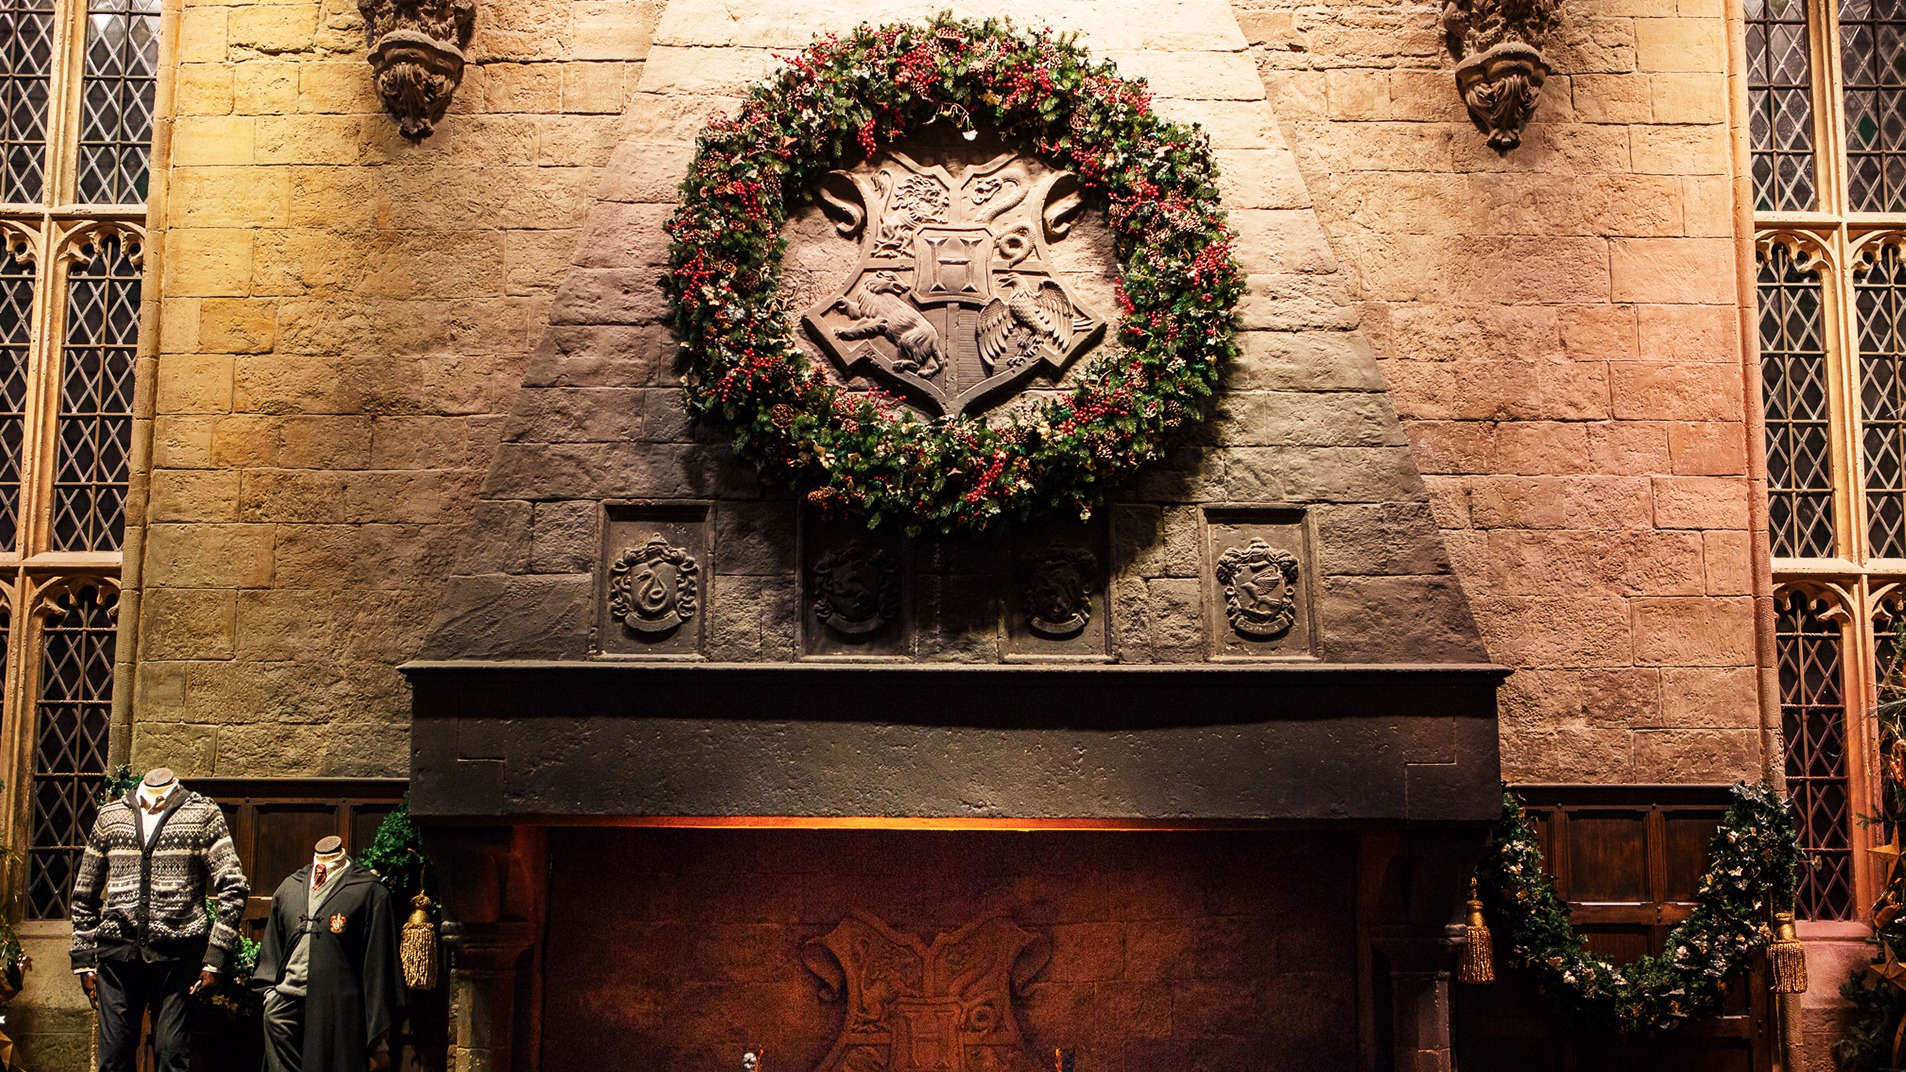 Video call background - Festive Great Hall Fireplace